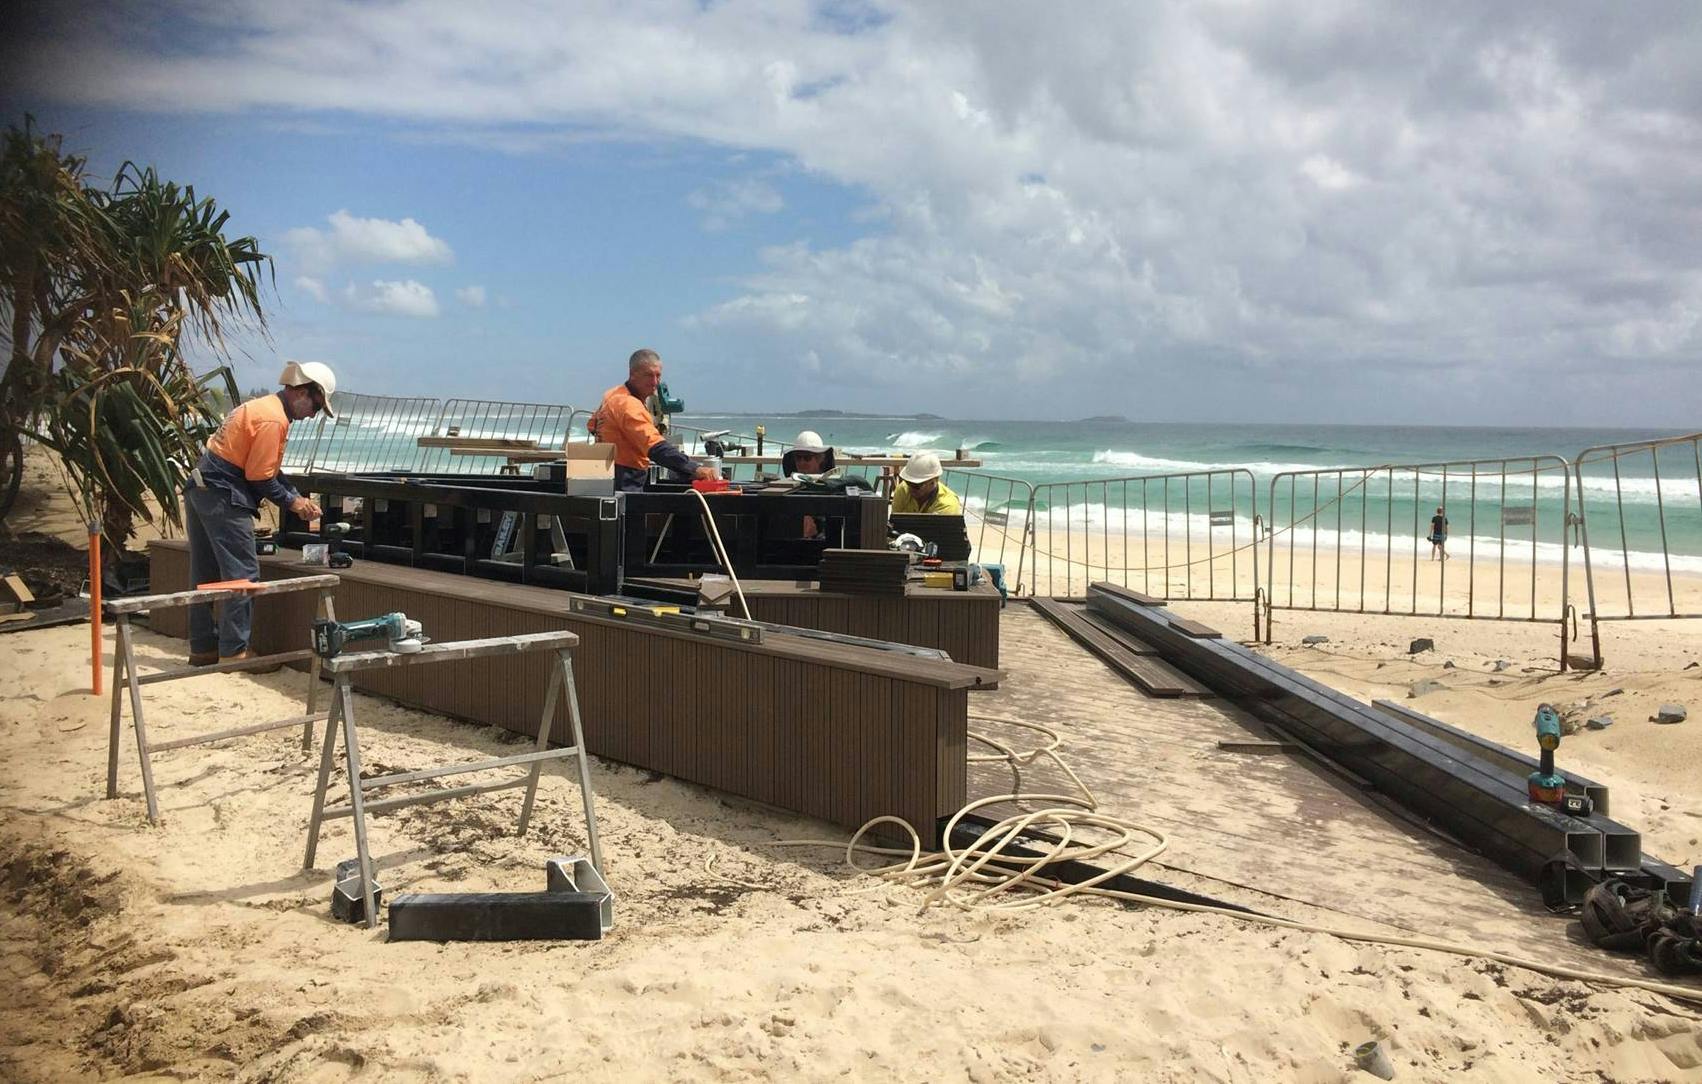 Construction of the park's viewing platform overlooking the beach and ocean.